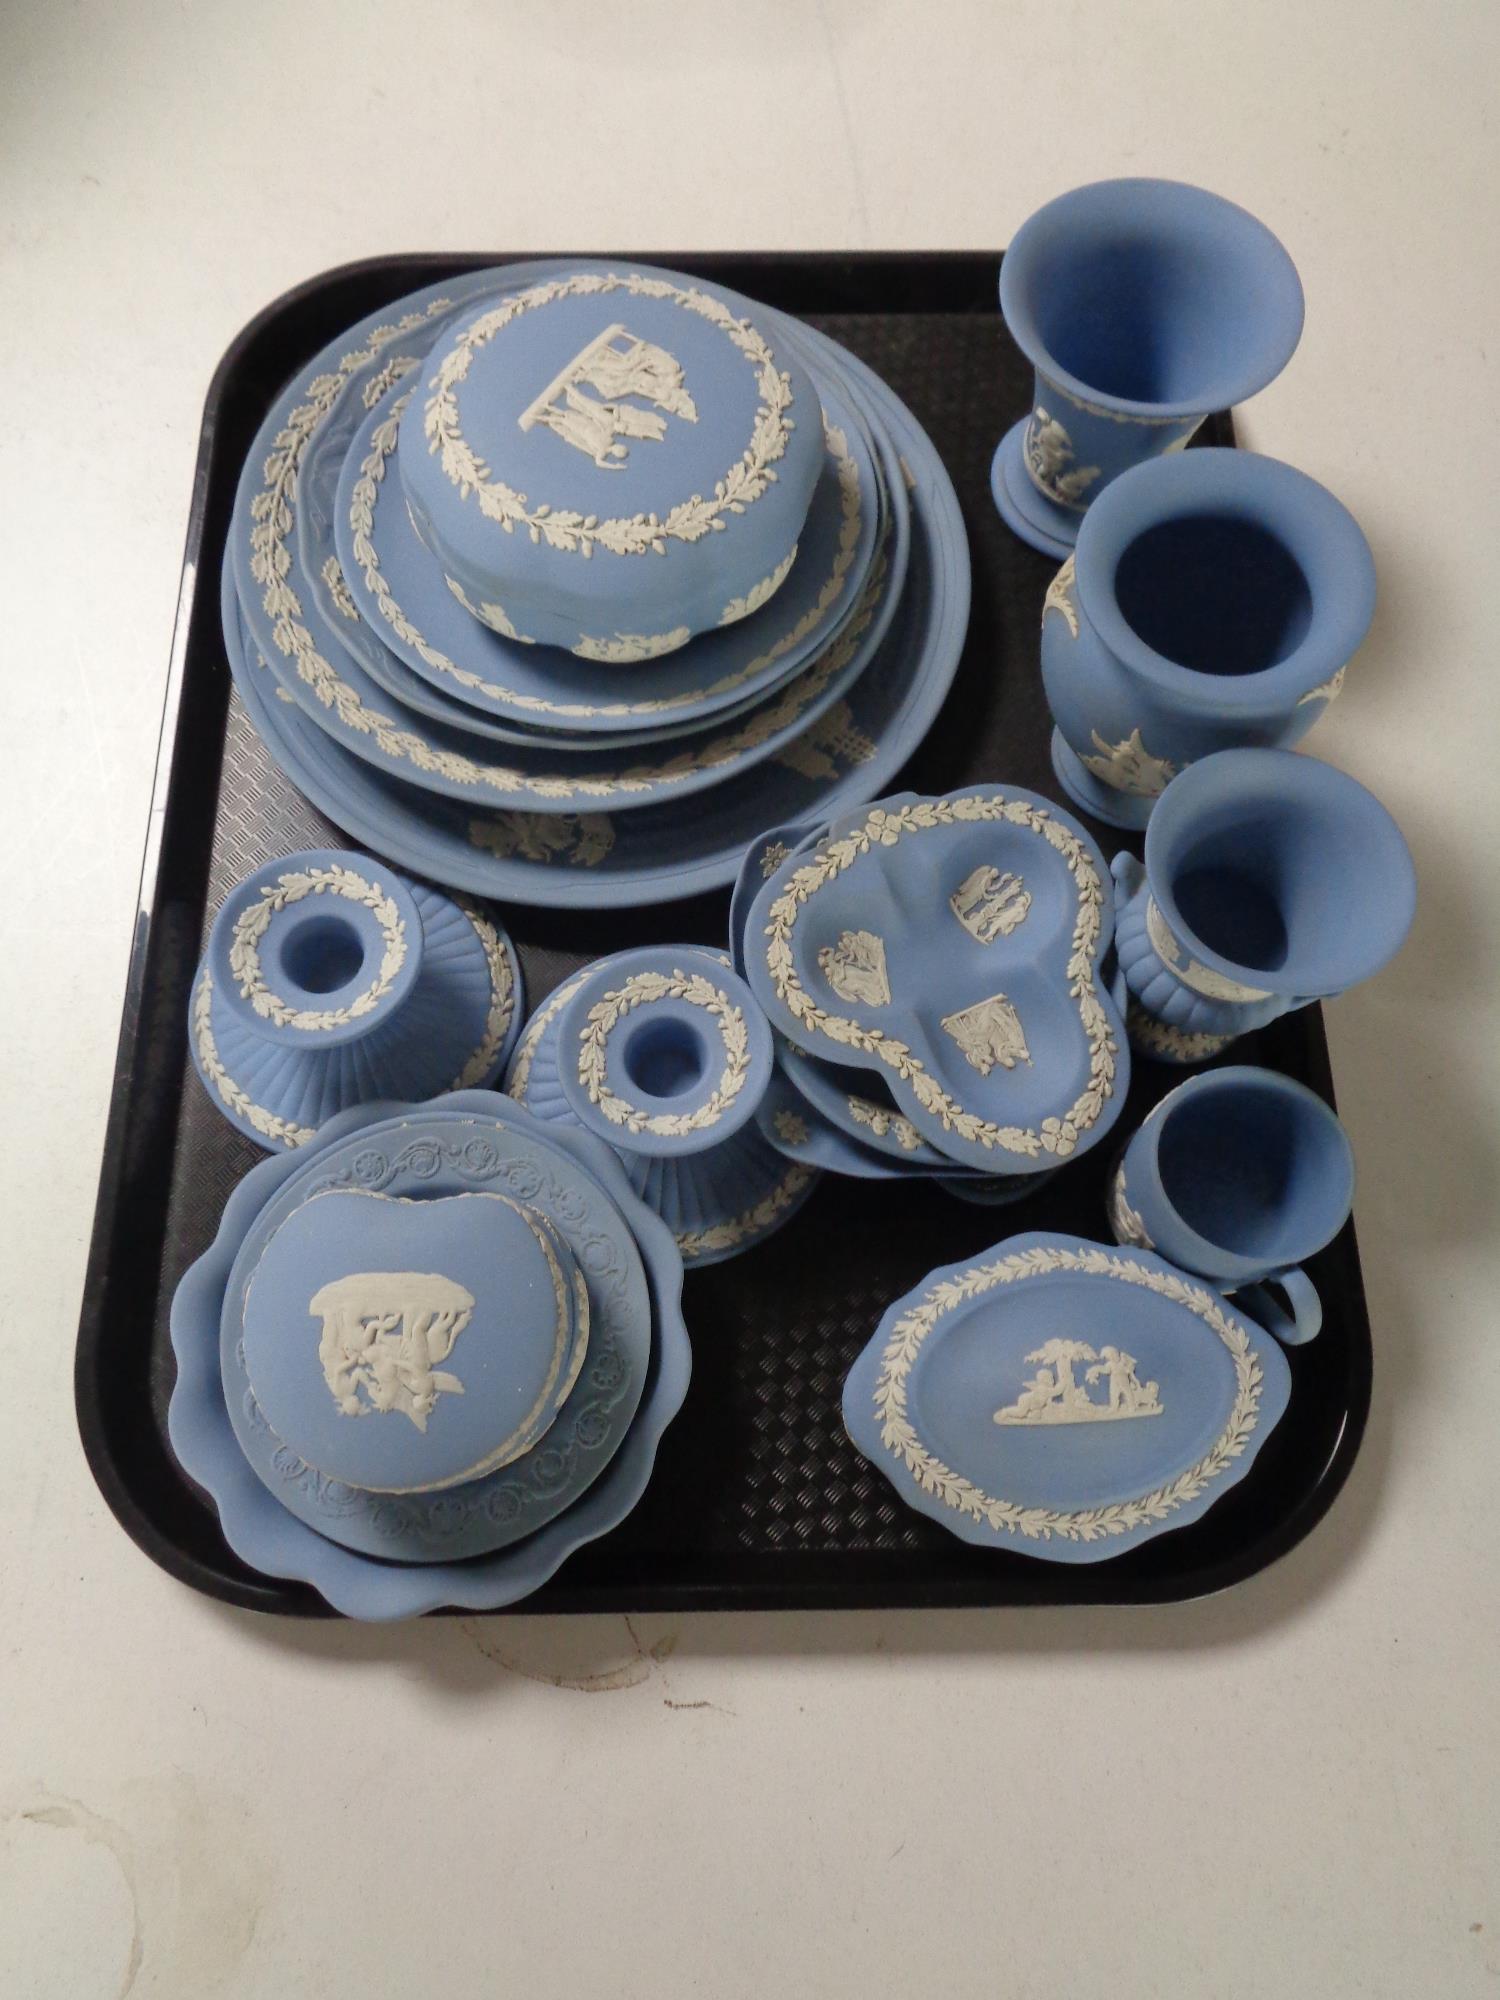 A tray containing 19 pieces of Wedgwood blue and white Jasperware